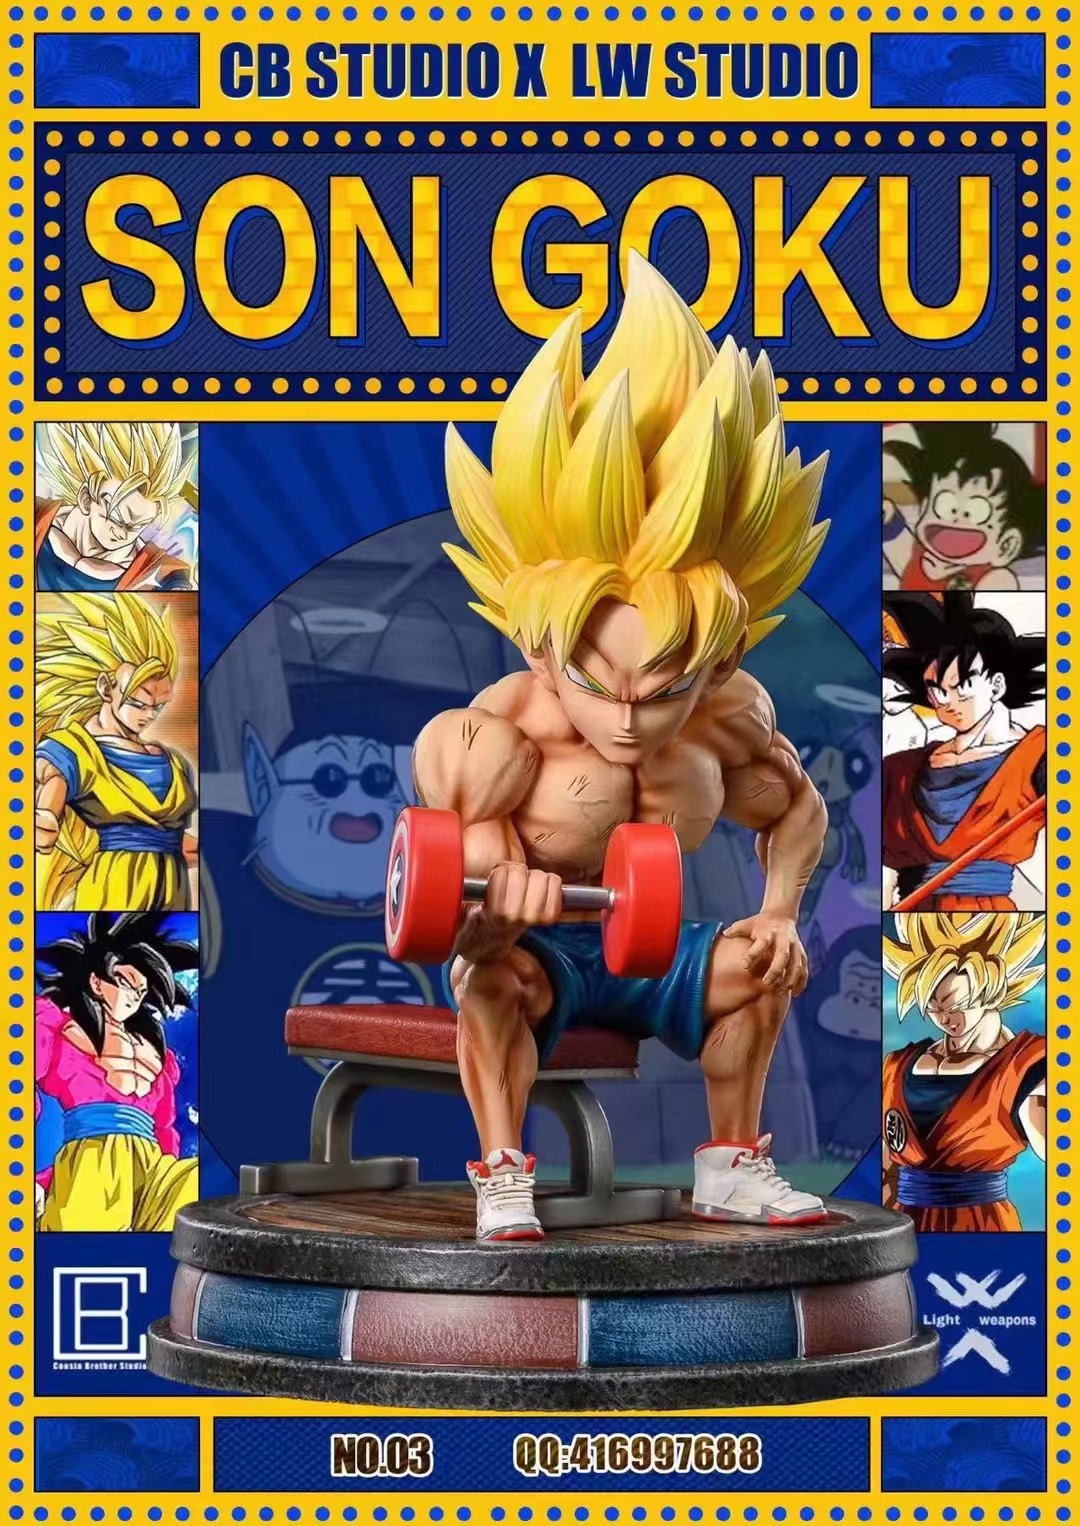 【Preorder】Cousin Brother X Light weapons studio Dragon Ball Fitness Goku Resin statue